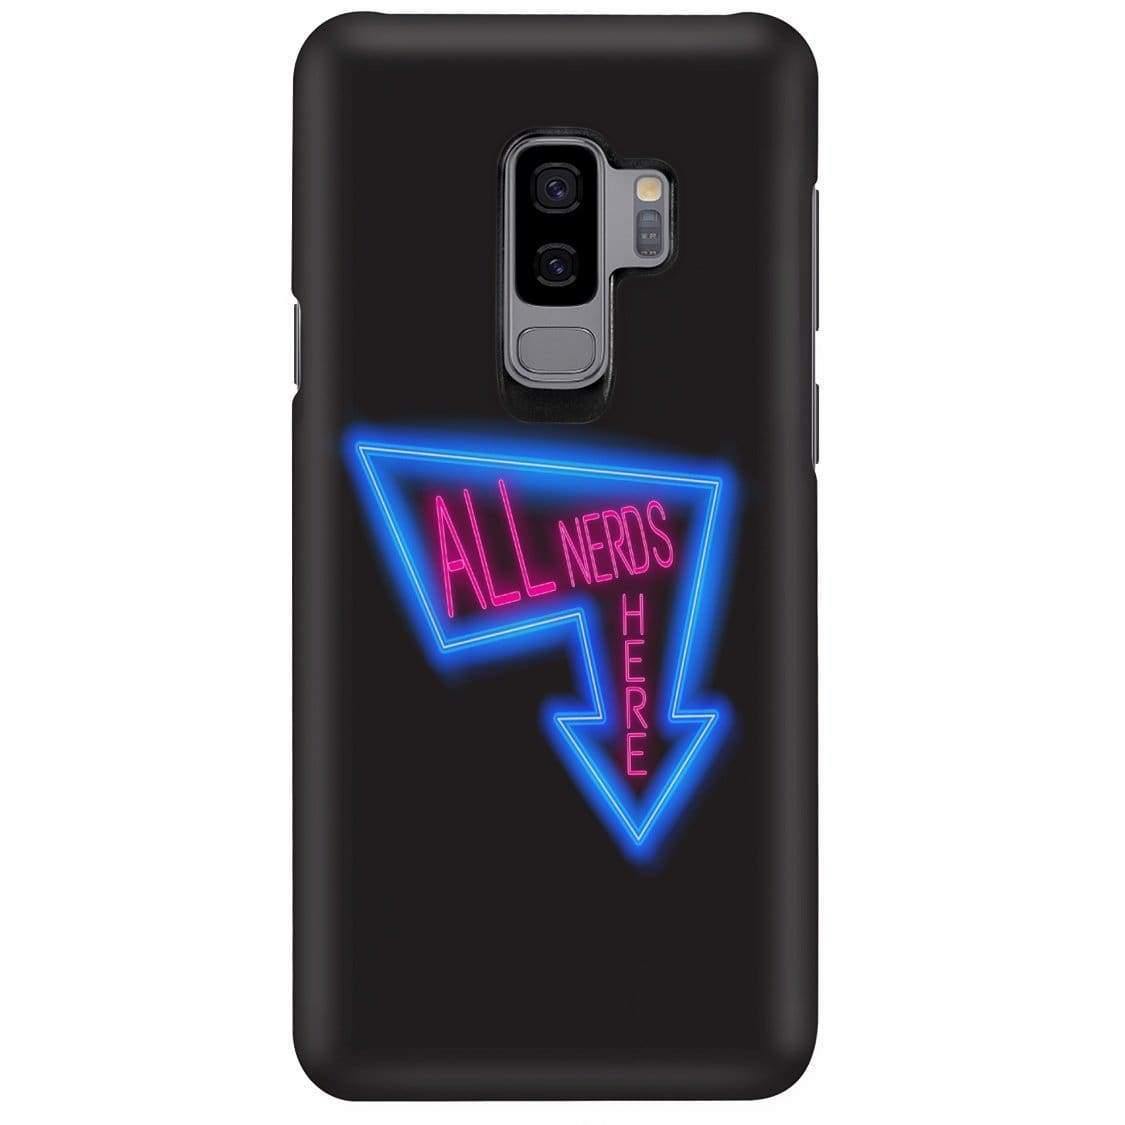 All Nerds Here Neon Logo Phone Case - Snap * iPhone * Samsung * - Samsung Galaxy S9 Plus Case / Gloss / All Nerds Here